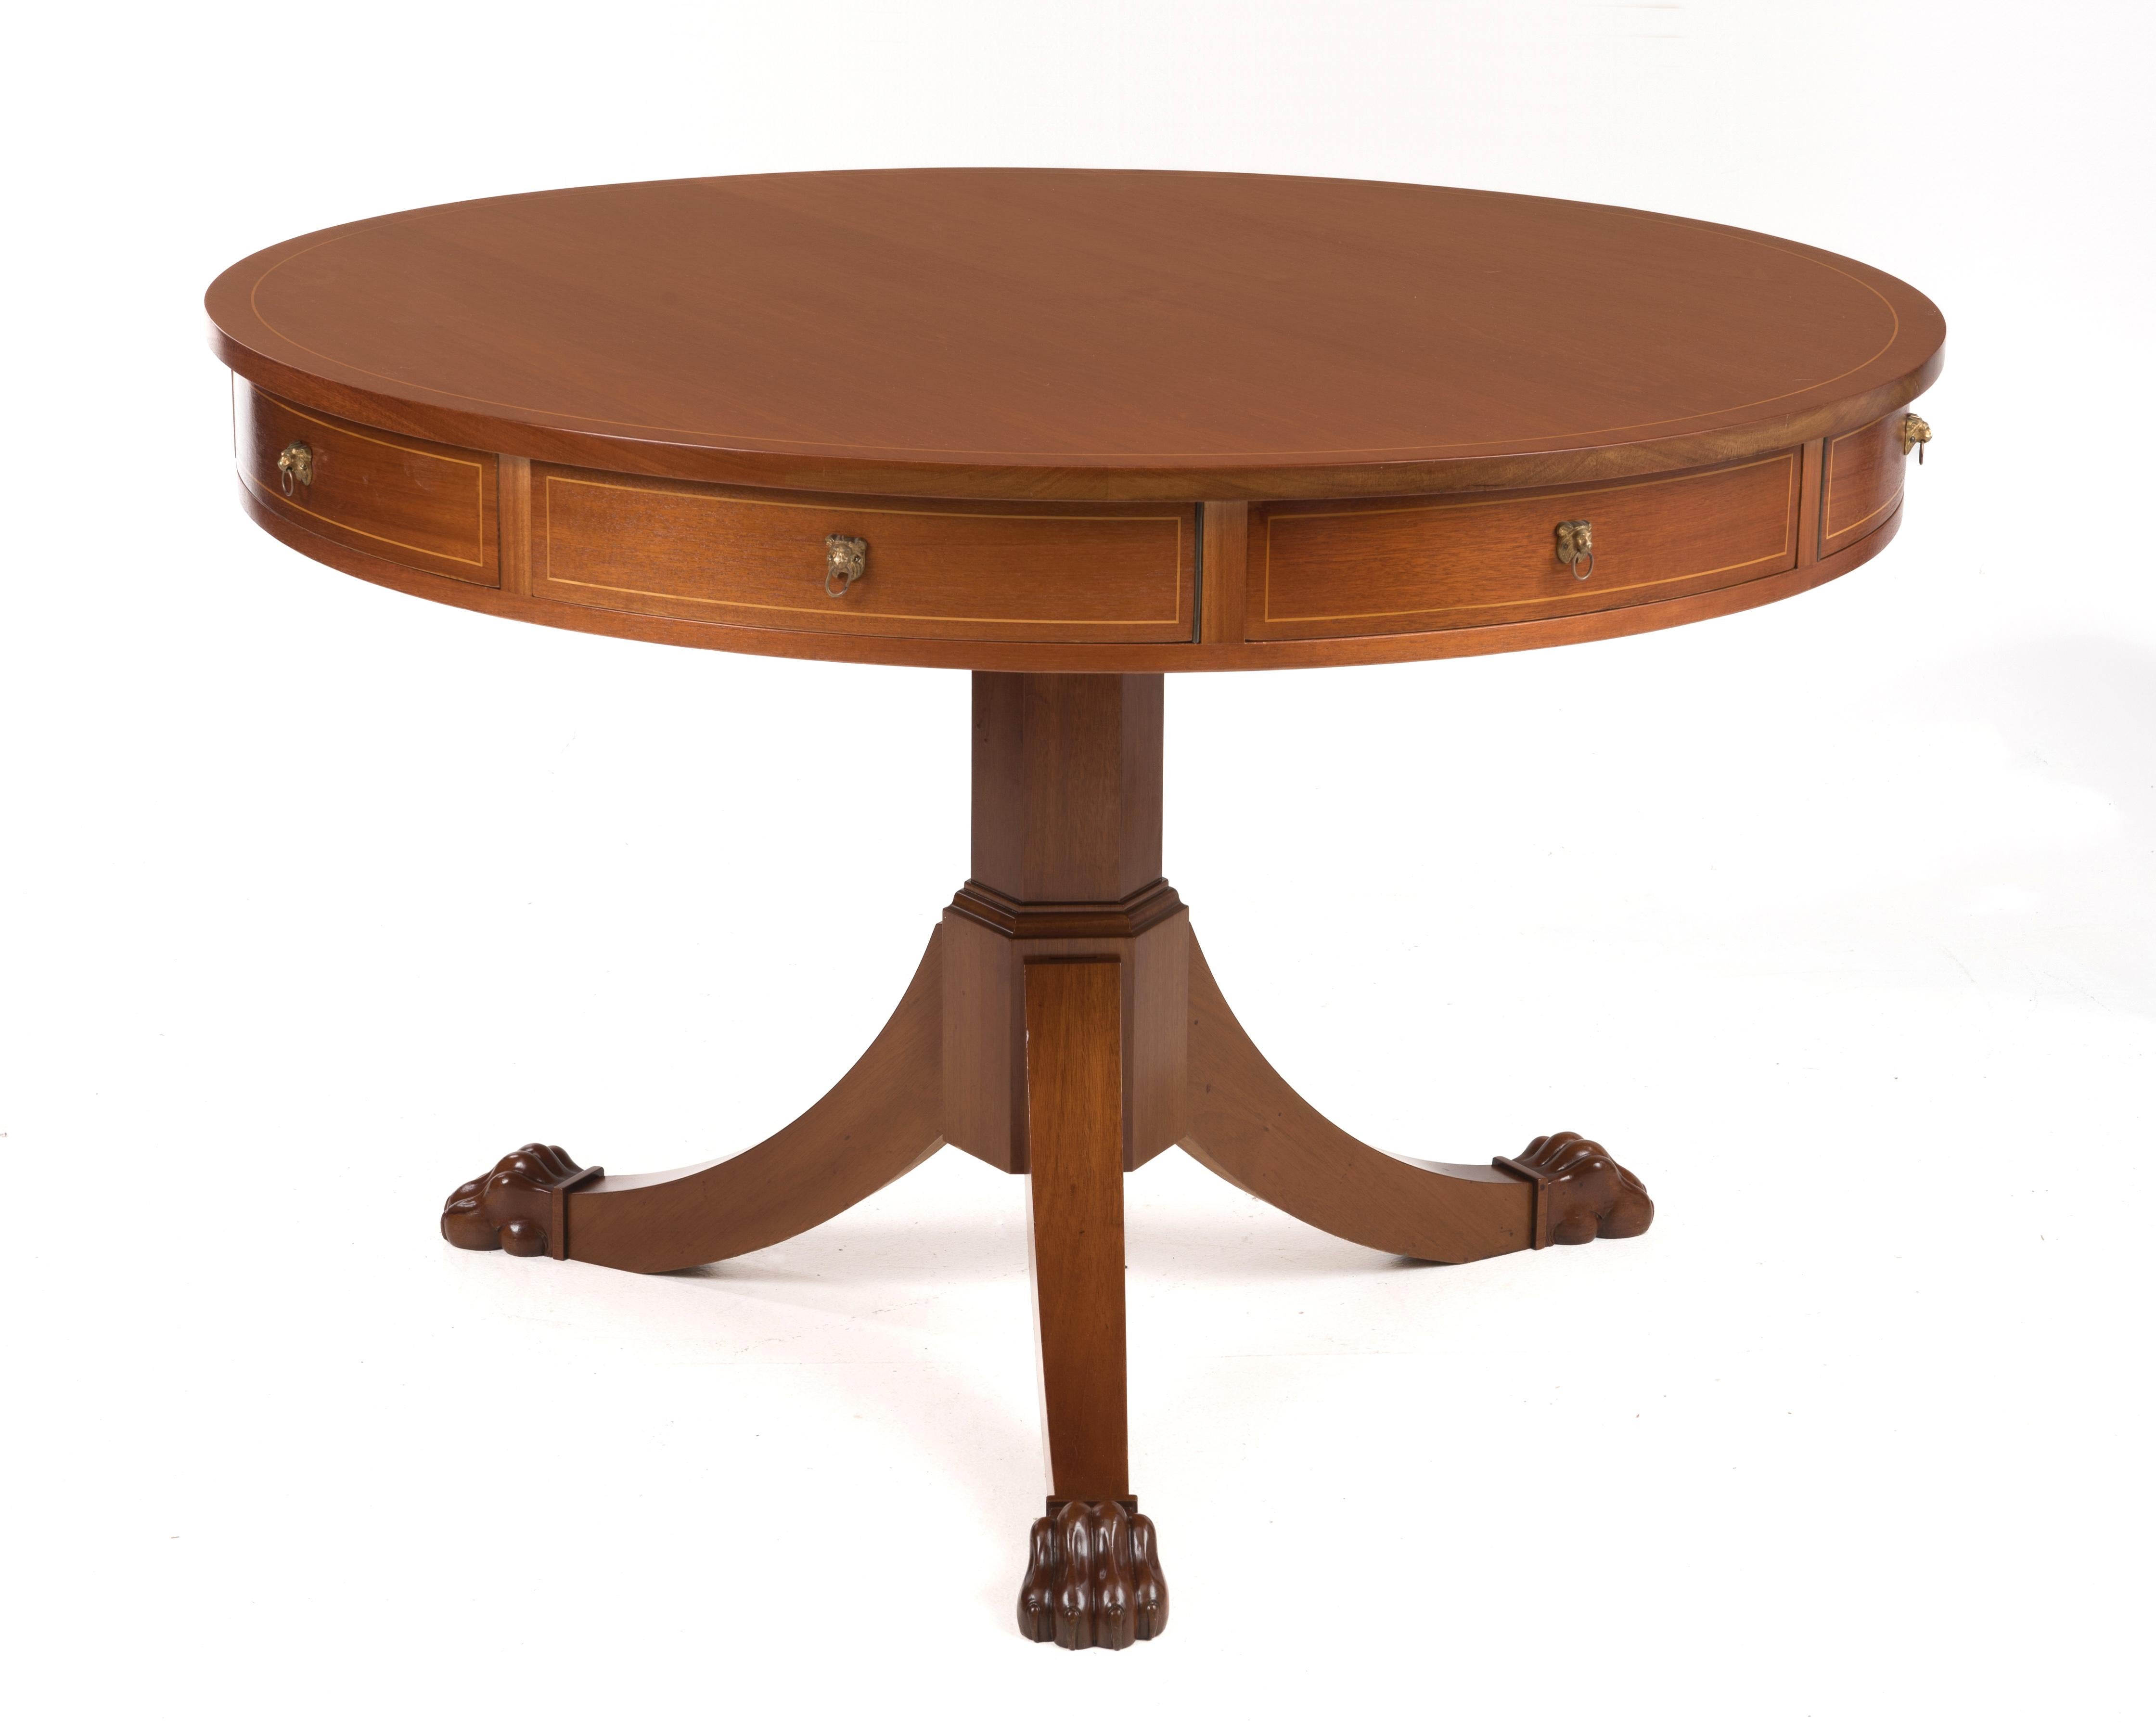 A large and impressive antique Regency style rotating rent table. Mahogany throughout, inlaid top with carved paw feet and brass lion head hardware. Purchased direct from an estate and we were told the table was purchased by a family member in